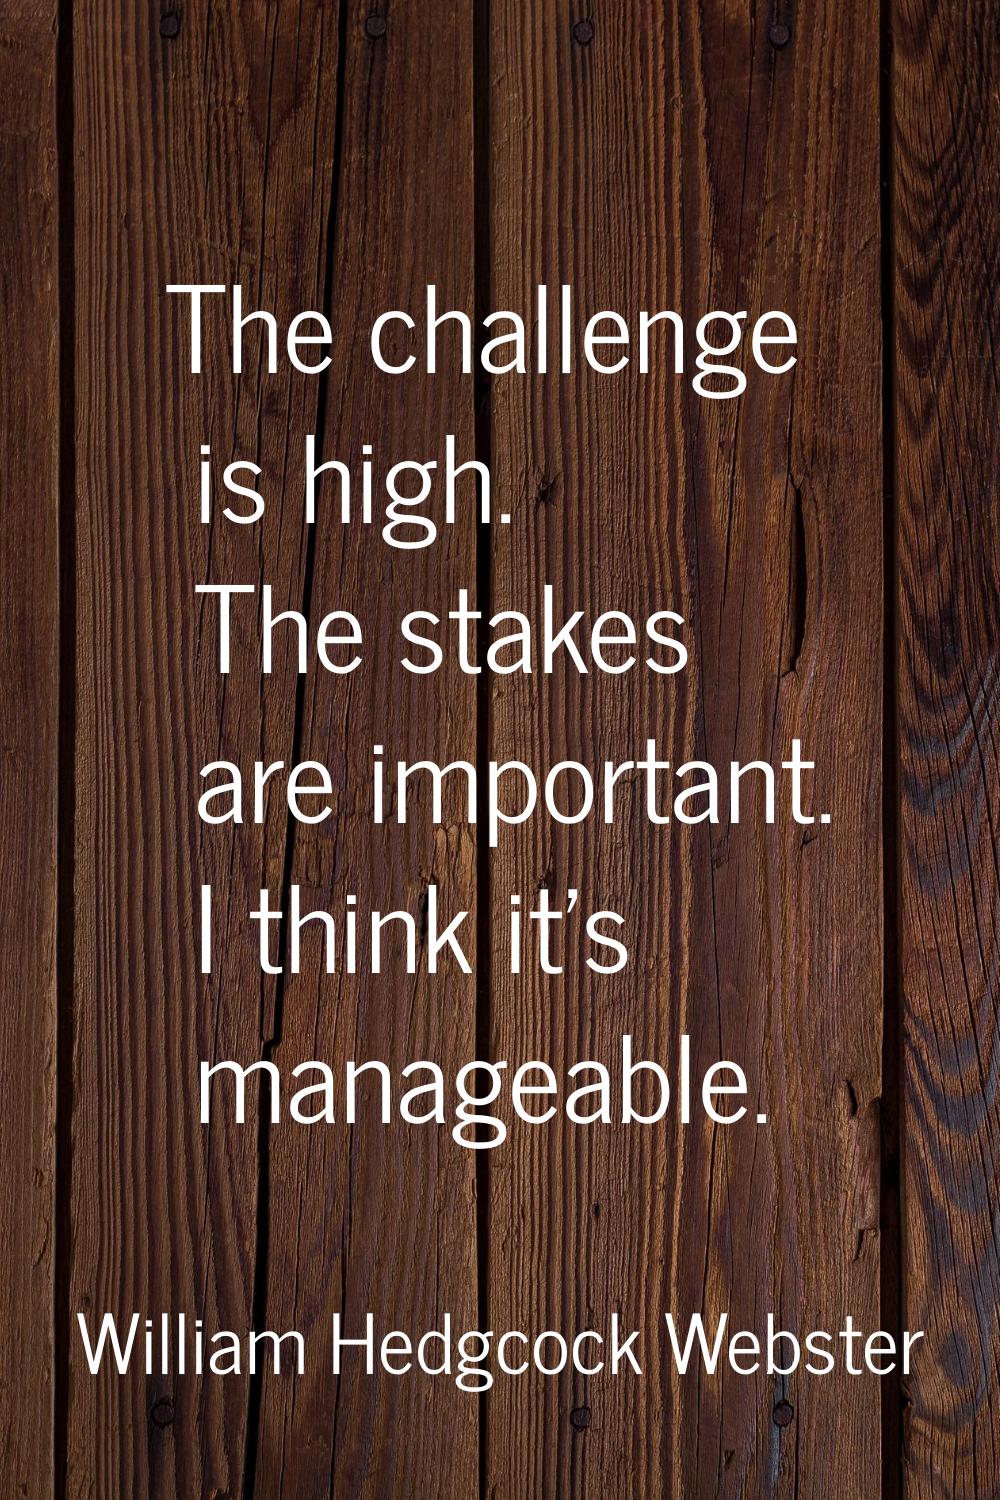 The challenge is high. The stakes are important. I think it's manageable.